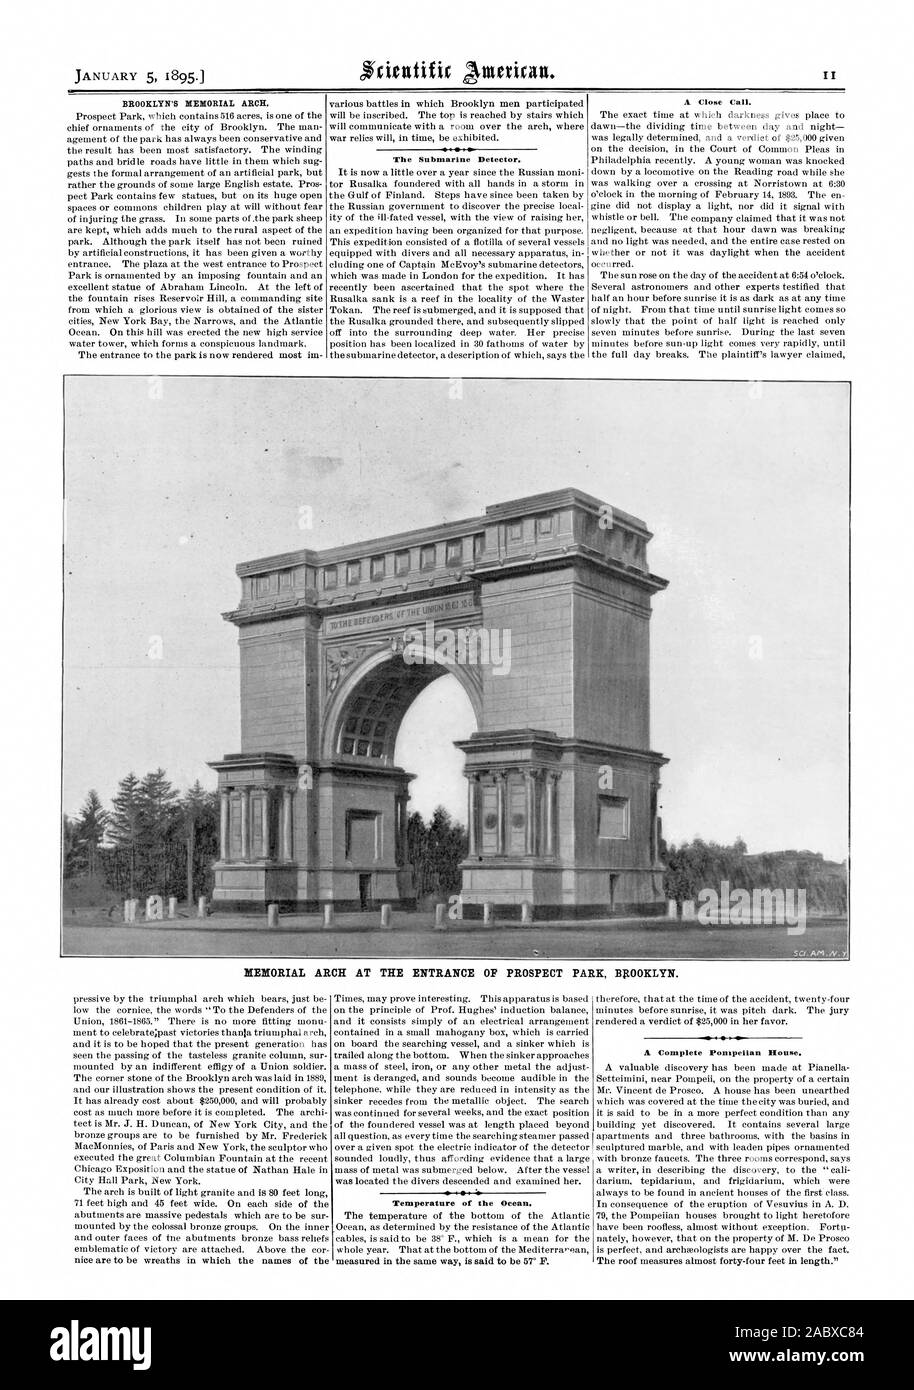 BROOKLYN'S MEMORIAL ARCH. The Submarine Detector. A Close Call. MEMORIAL ARCH AT THE ENTRANCE OF PROSPECT PARK BROOKLYN. Temperature of the Ocean. A Complete Pompelian House., scientific american, 1895-01-05 Stock Photo